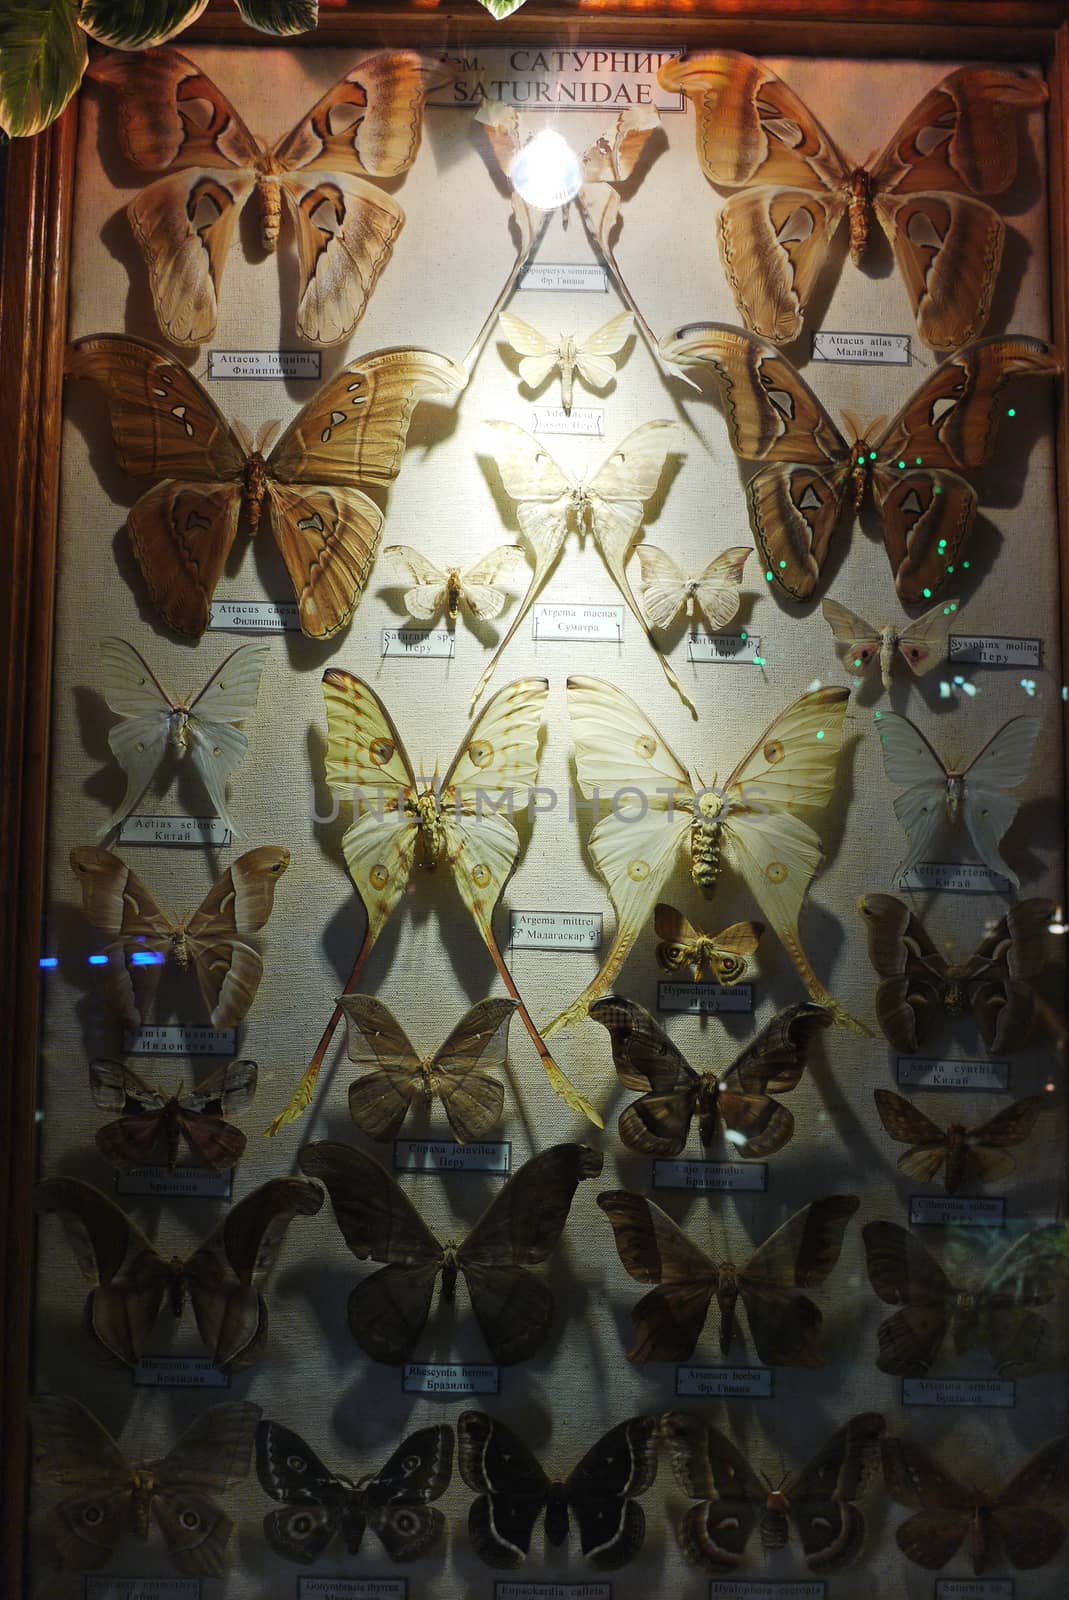 exhibition picture of herbarium dry butterflies of various kinds